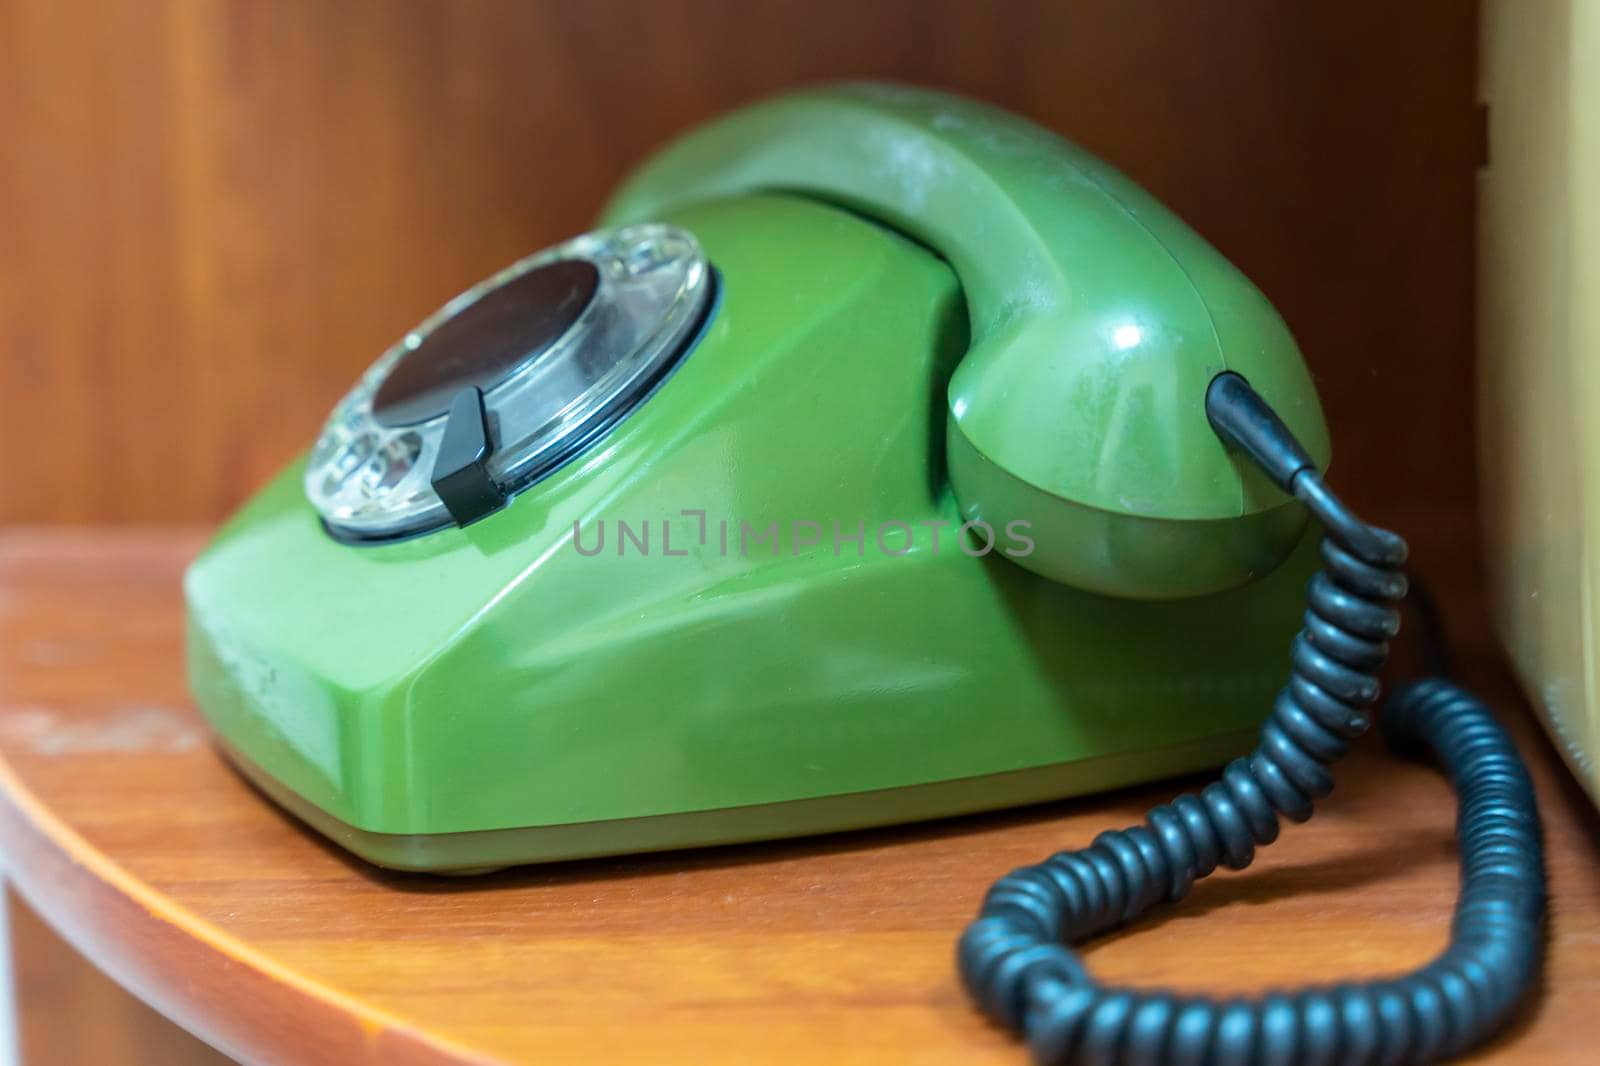 green vintage phone with a rotating dial dial. the phone with the receiver on the shelf